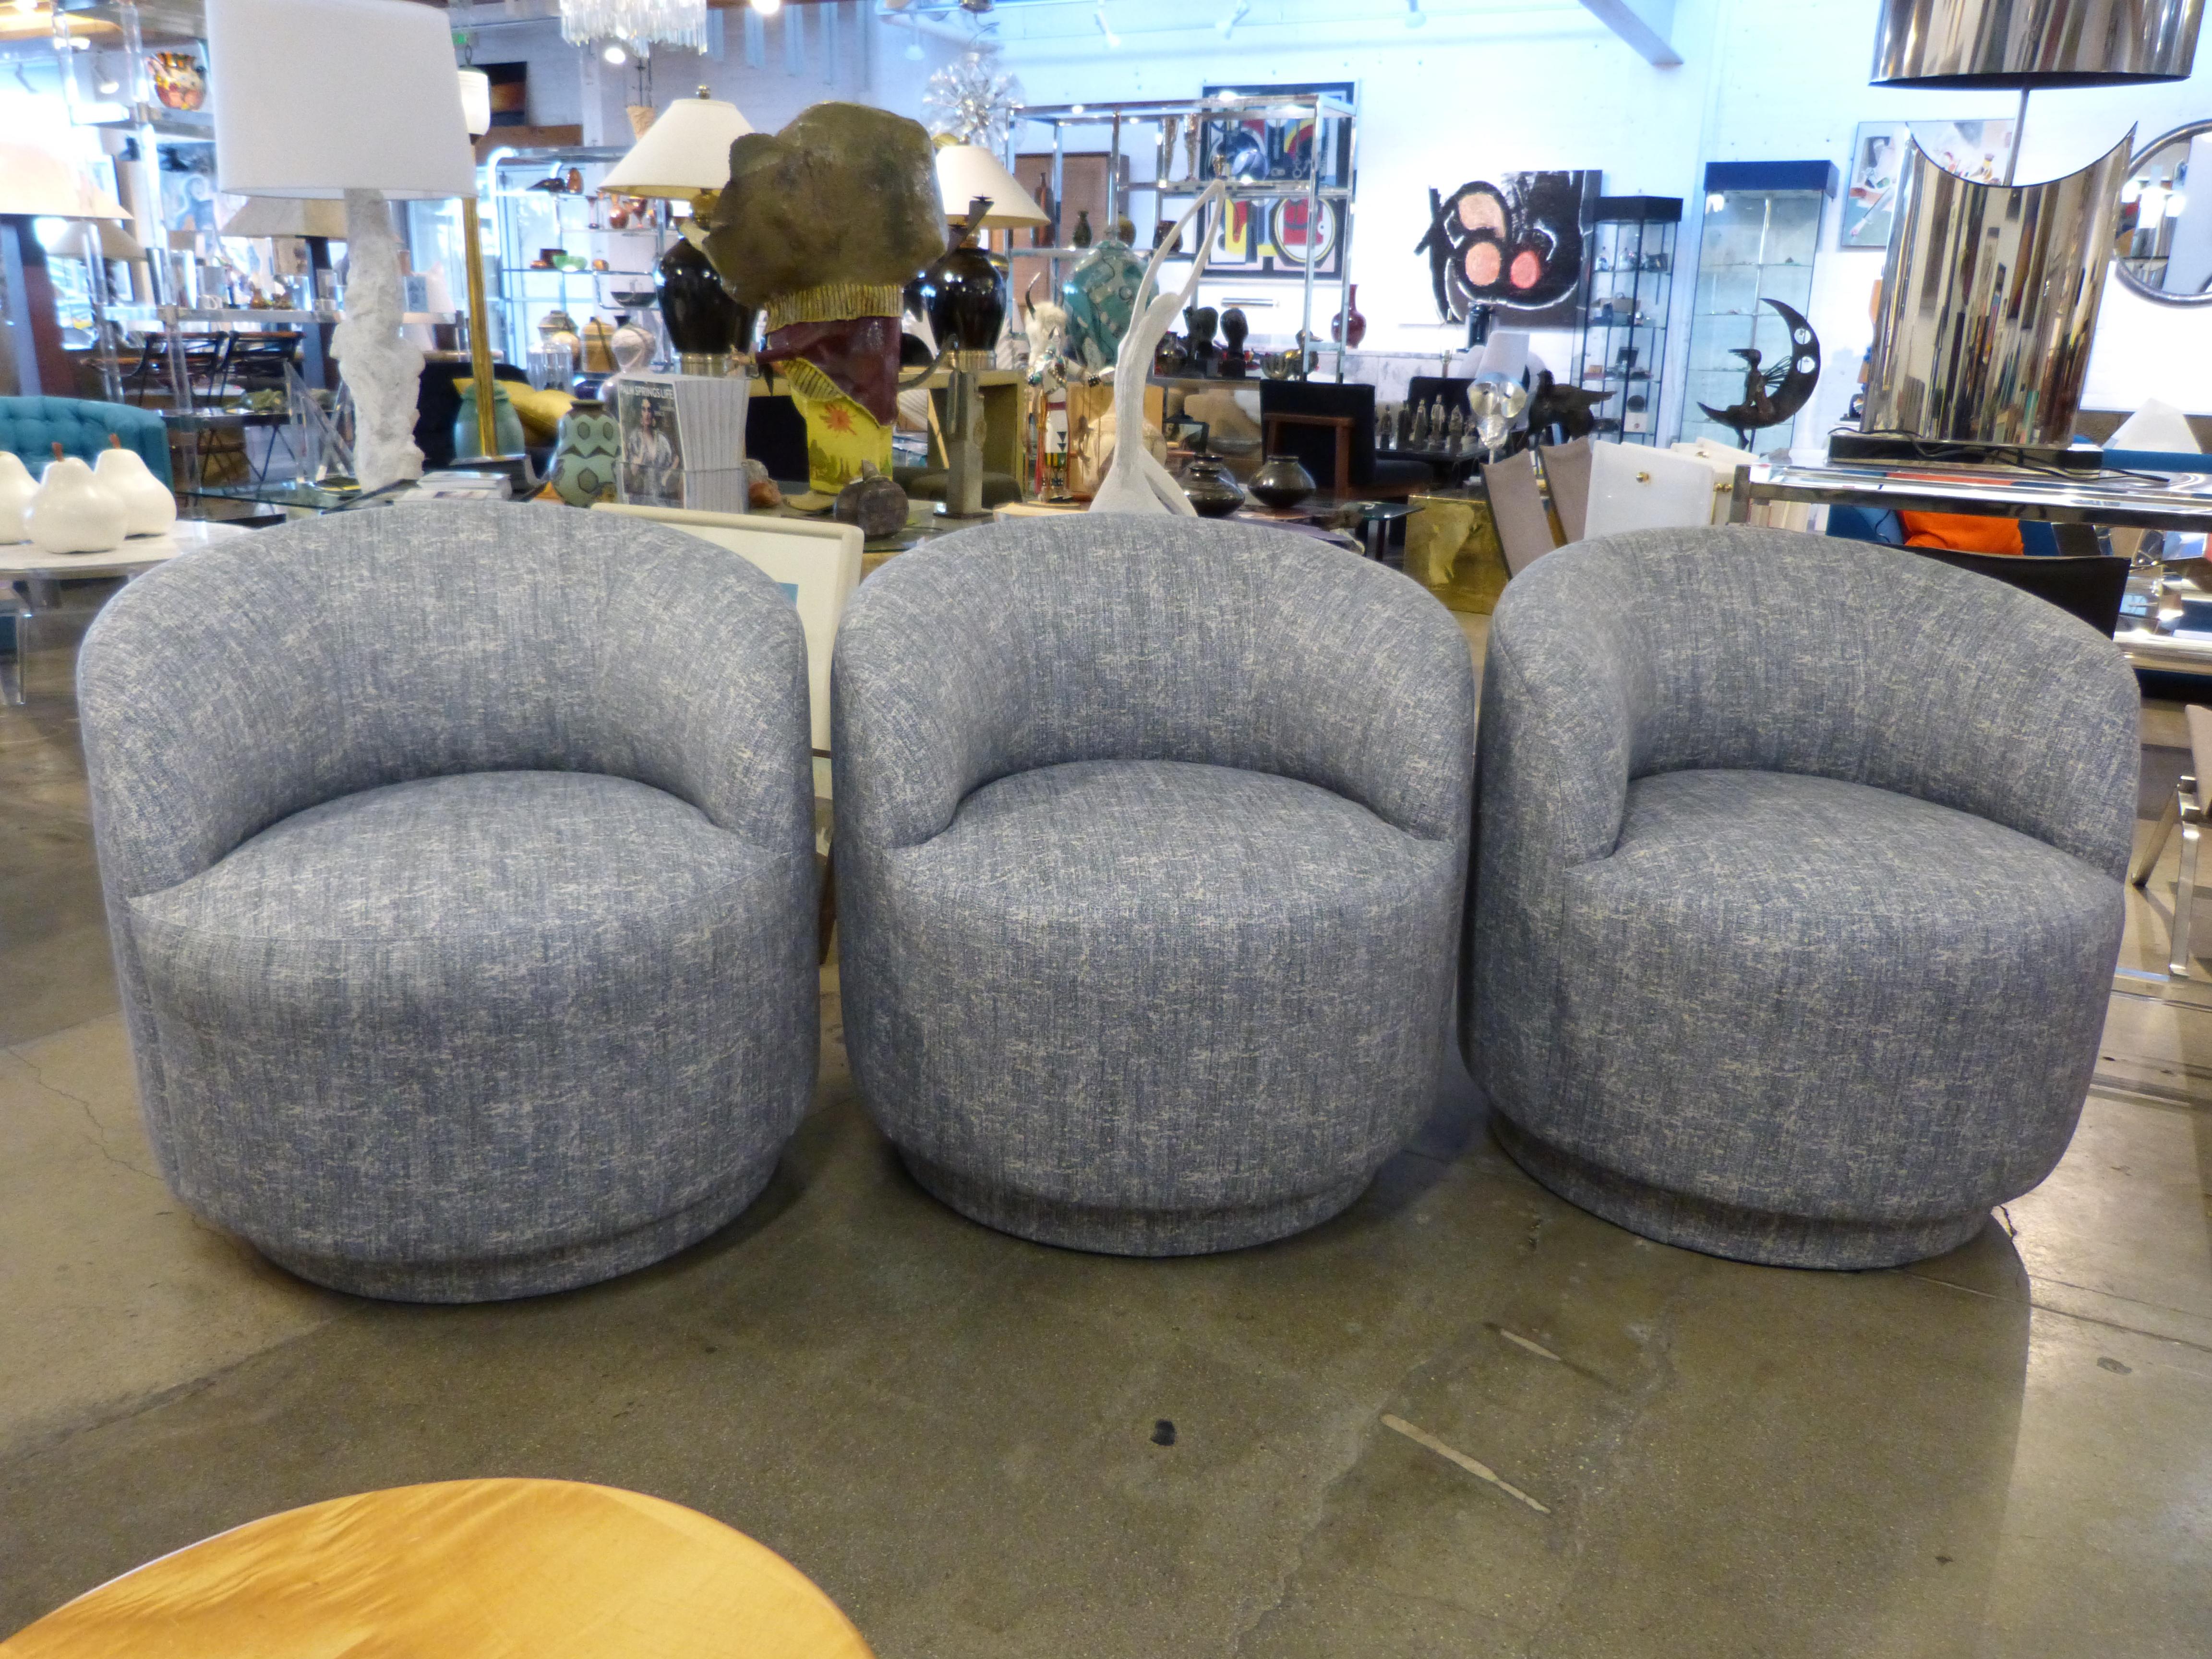 American Set of 3 Upholstered Chairs on Platforms